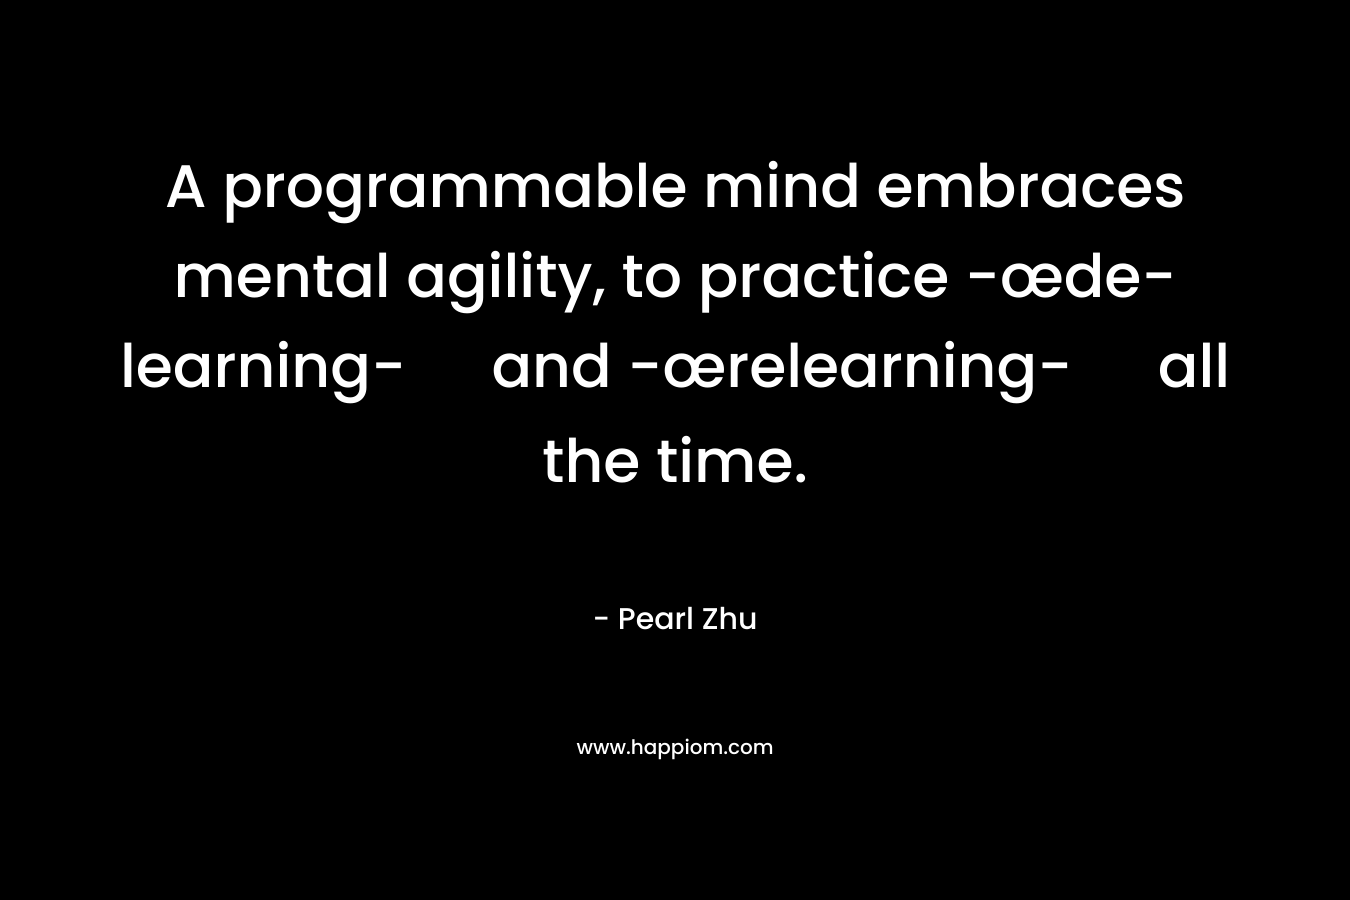 A programmable mind embraces mental agility, to practice -œde-learning- and -œrelearning- all the time.